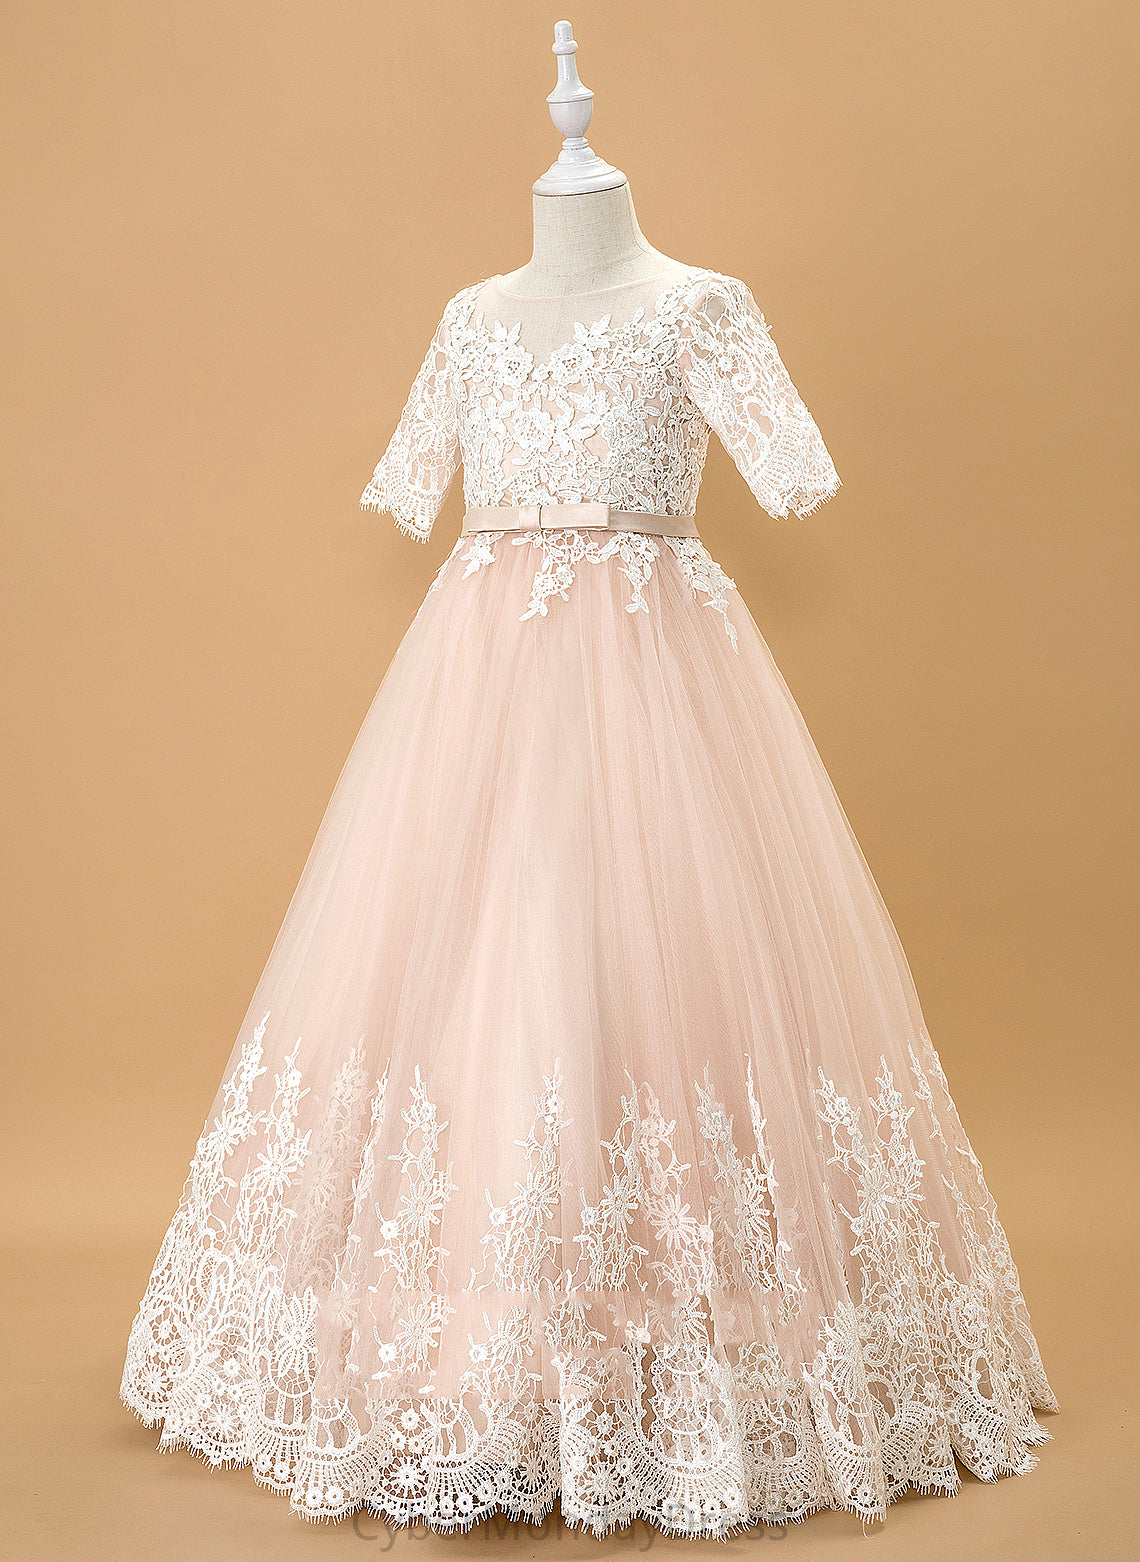 Floor-length Sleeves Neck With Bow(s) Ball-Gown/Princess Una 1/2 Dress Flower - Tulle/Lace Girl Flower Girl Dresses Scoop